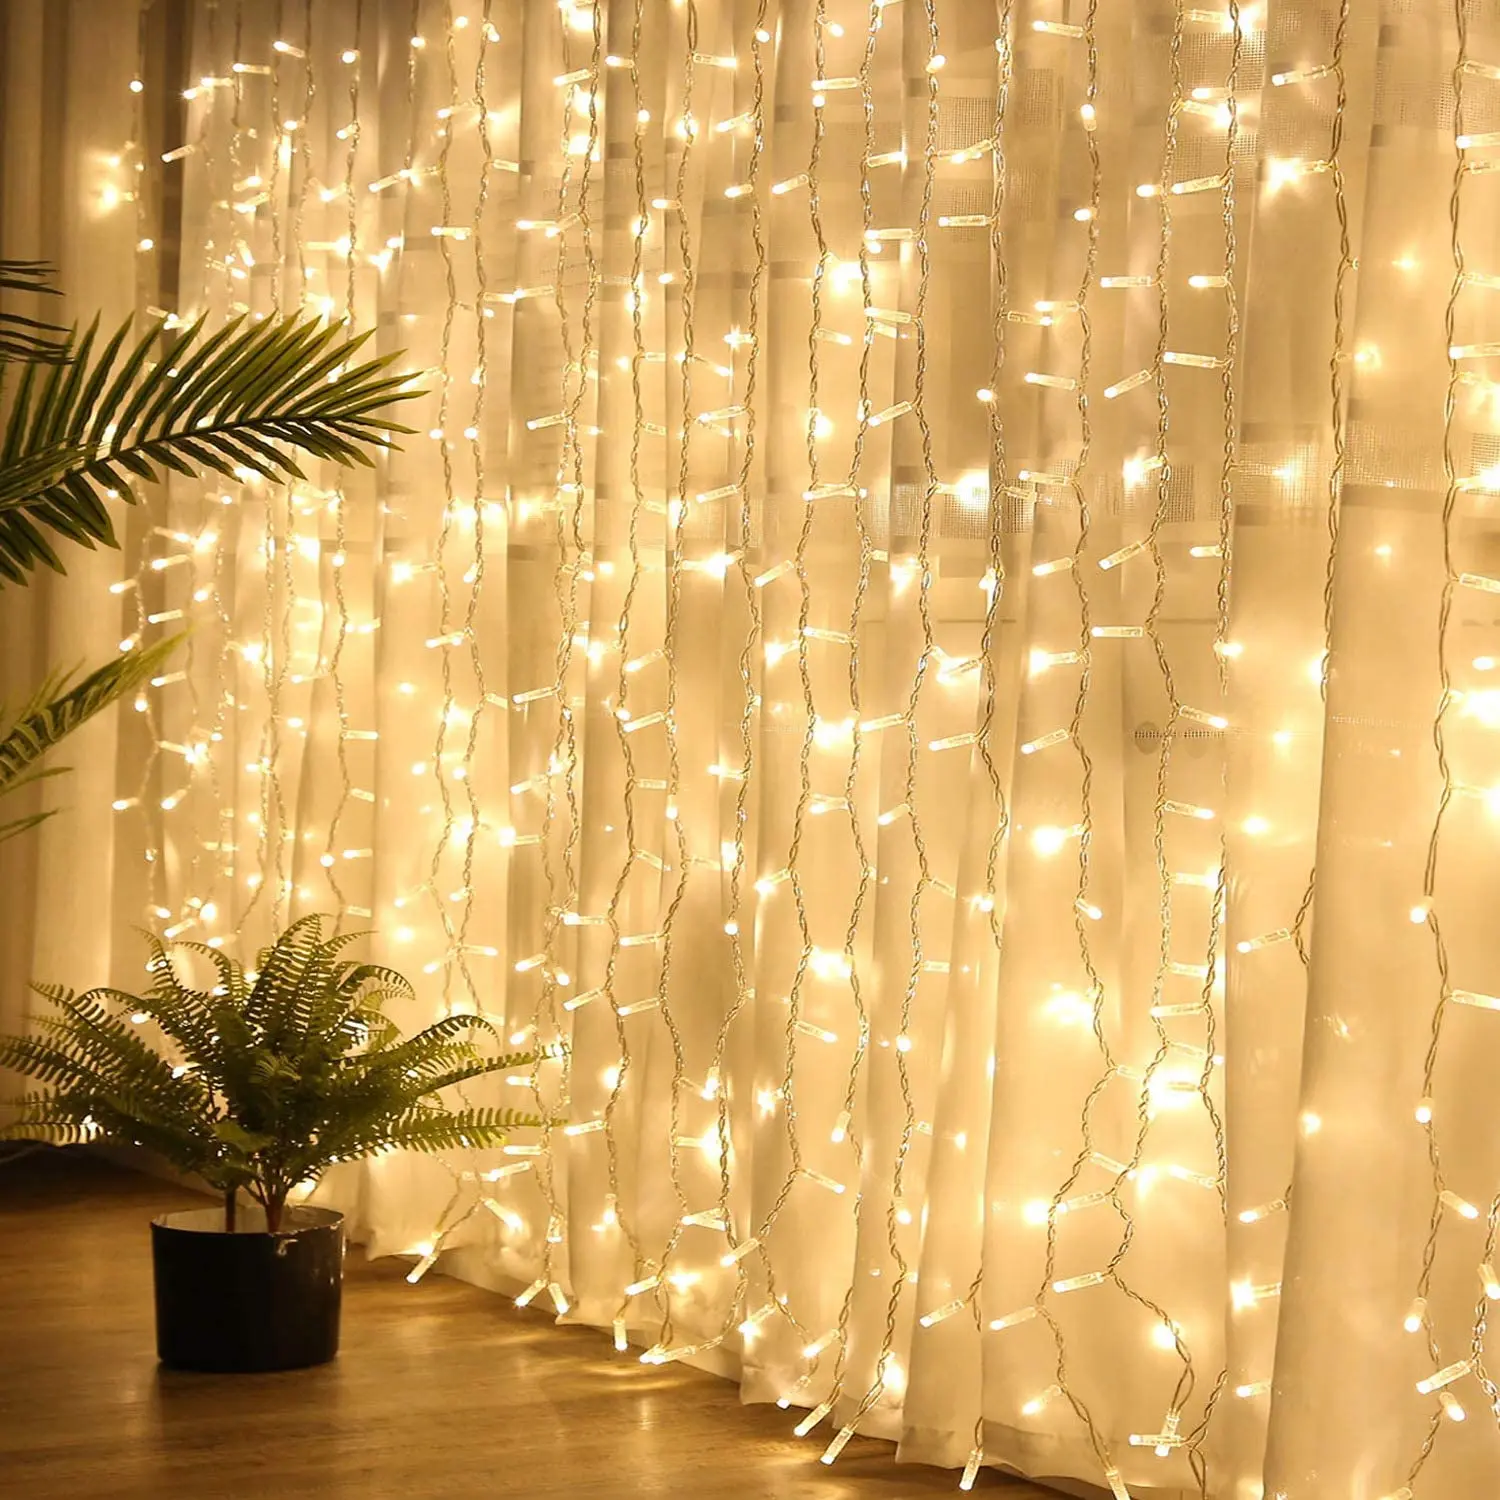 300 LED Window Curtain String Light Wedding Party Home Garden Bedroom Outdoor Indoor Wall Decorations